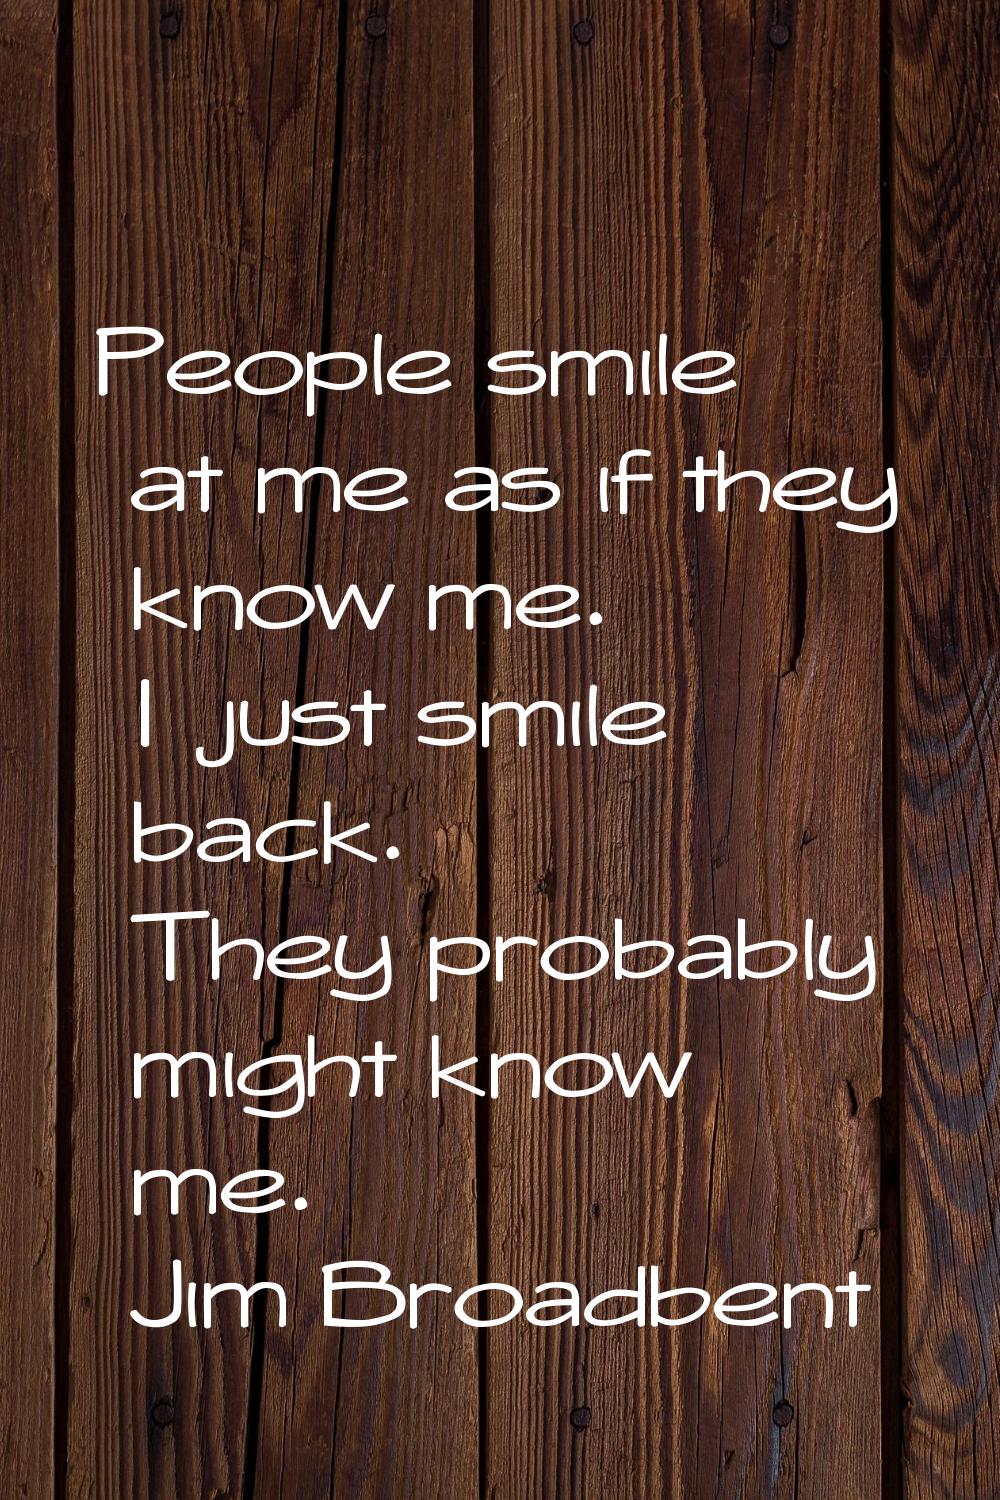 People smile at me as if they know me. I just smile back. They probably might know me.